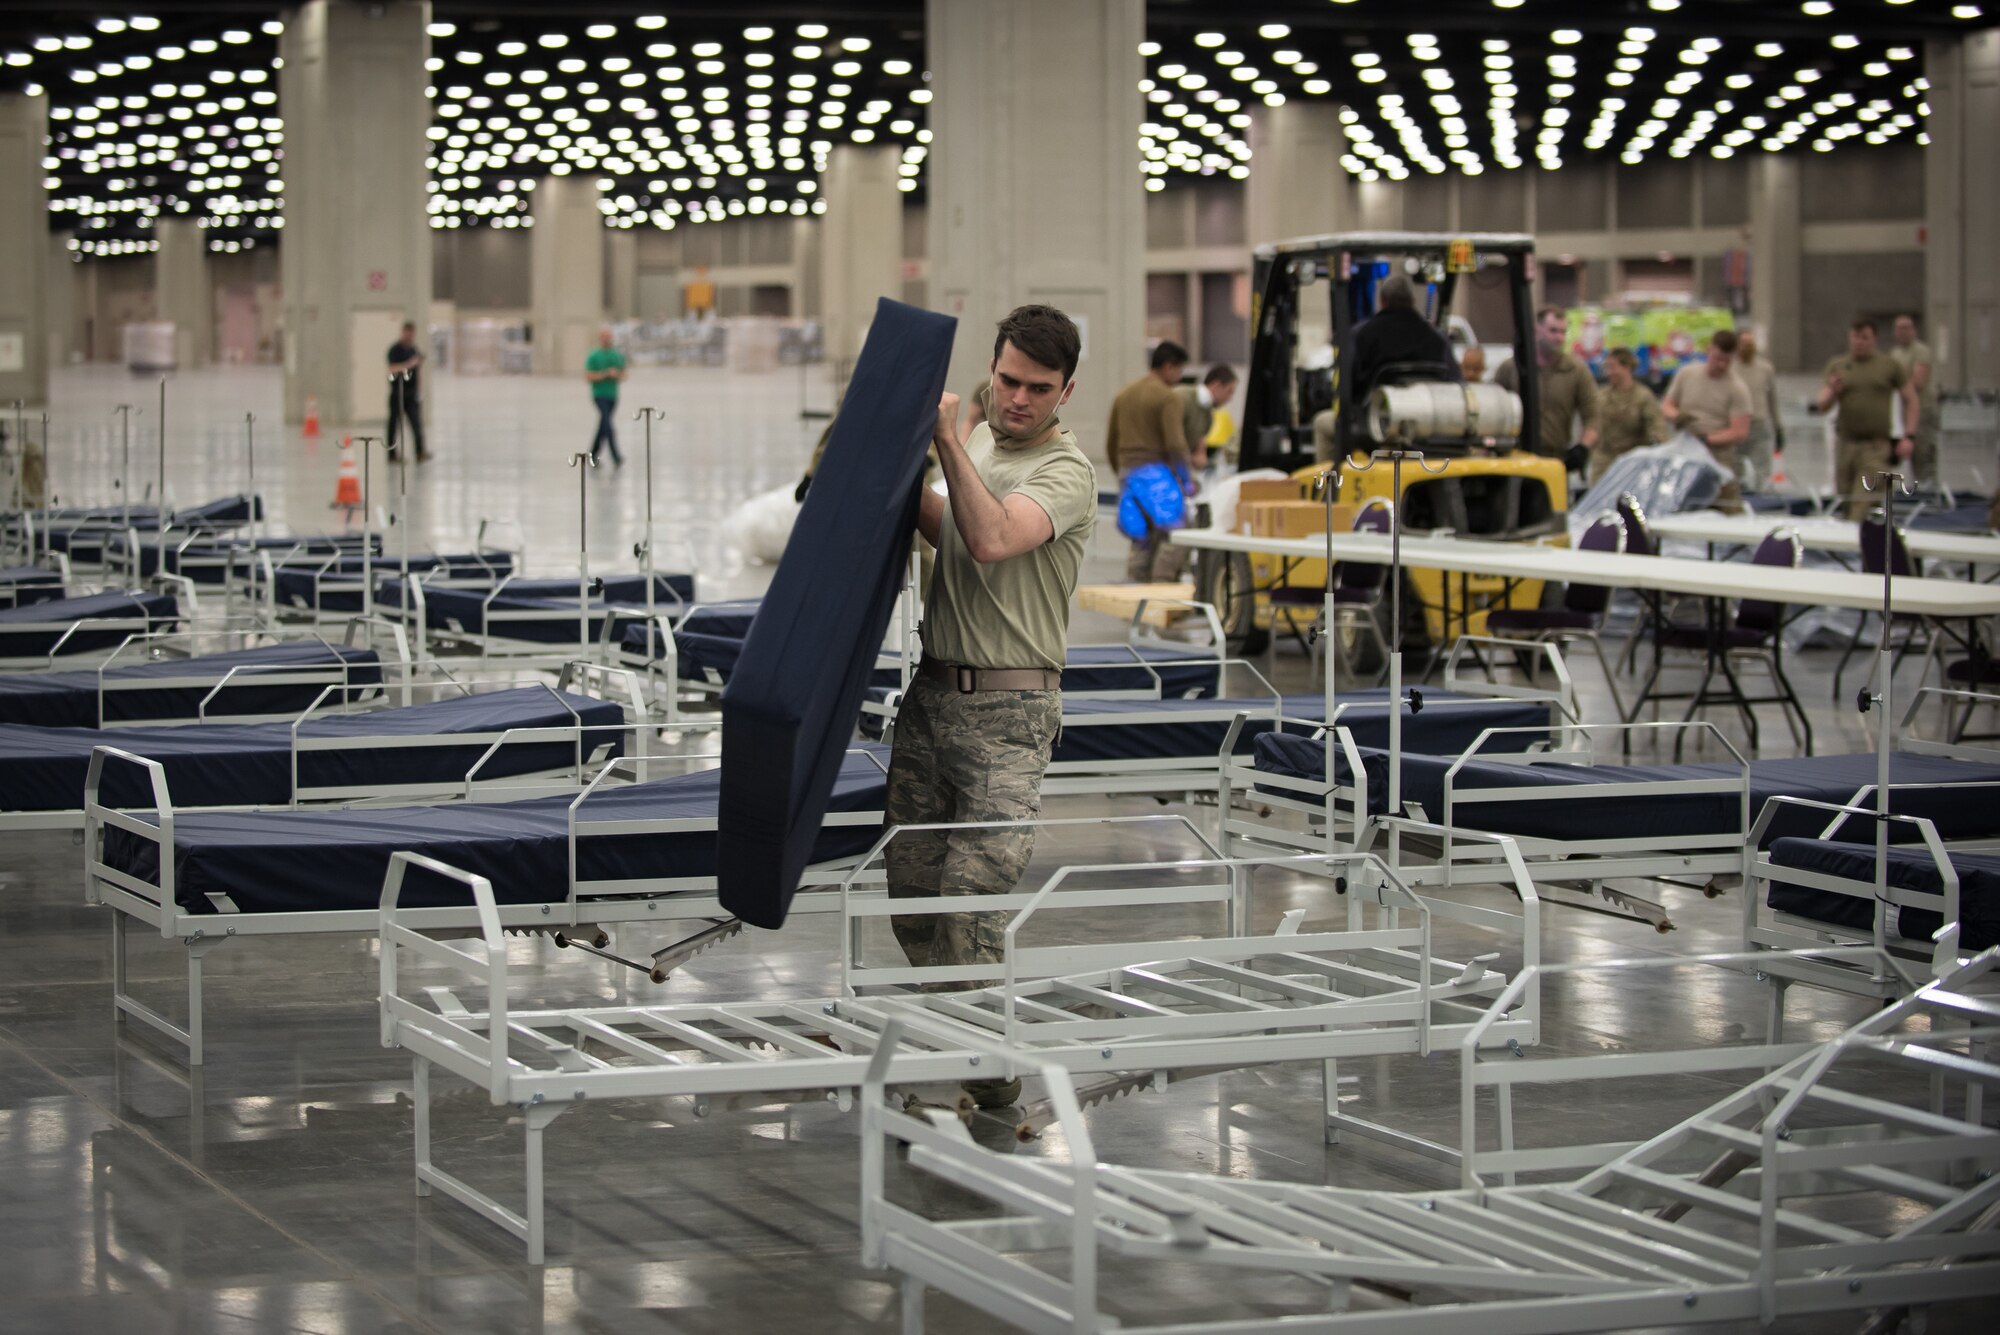 Senior Airman Tristan Baxter of the Kentucky Air National Guard's 123rd Civil Engineer Squadron places a mattress on a hospital bed at the Kentucky Fair and Exposition Center in Louisville, Ky., April 11, 2020. The site, which is expected to be operational April 15, will serve as an Alternate Care Facility for patients suffering from COVID-19 if area hospitals exceed available capacity. The location initially can treat up to 288 patients and is scalable to 2,000 beds. (U.S. Air National Guard photo by Dale Greer)